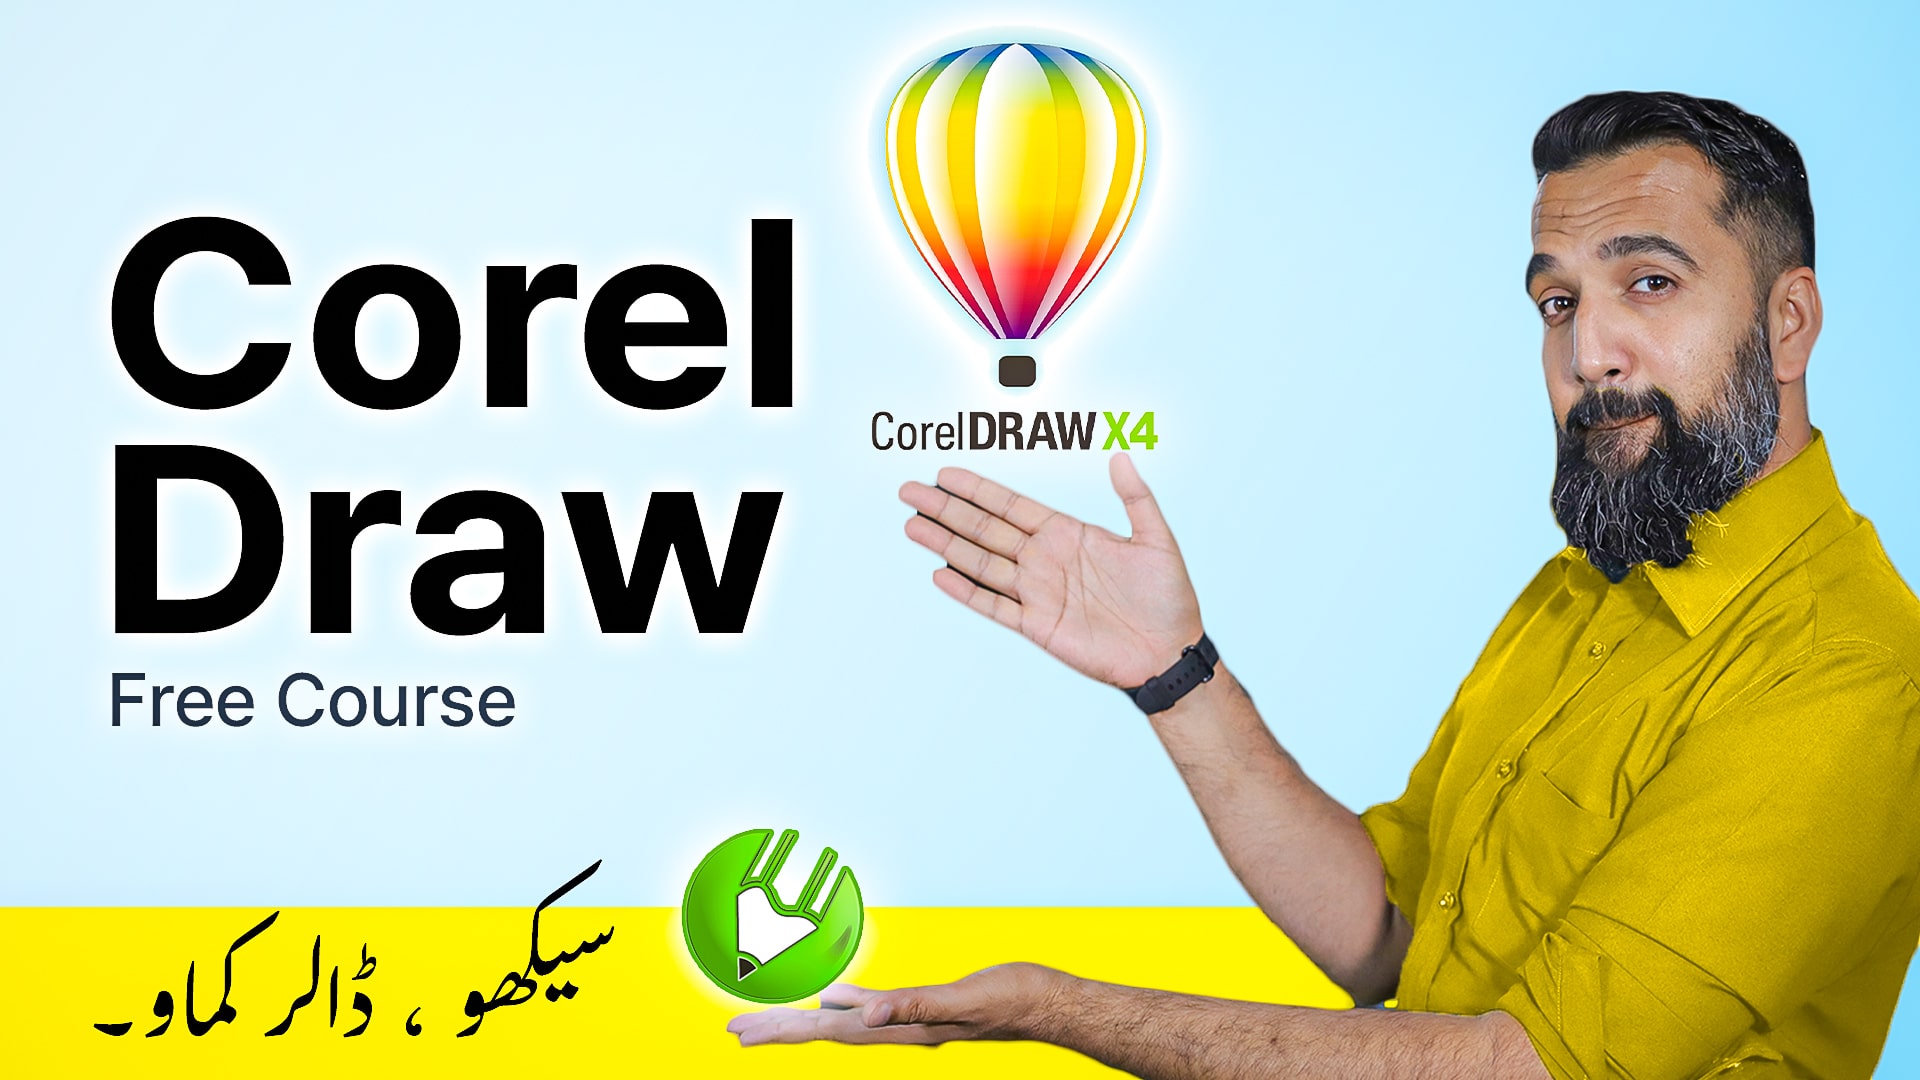  corel-draw-course-for-beginners-graphic-by-azadchaiwala-64f85b11528a6163203466.jpg 